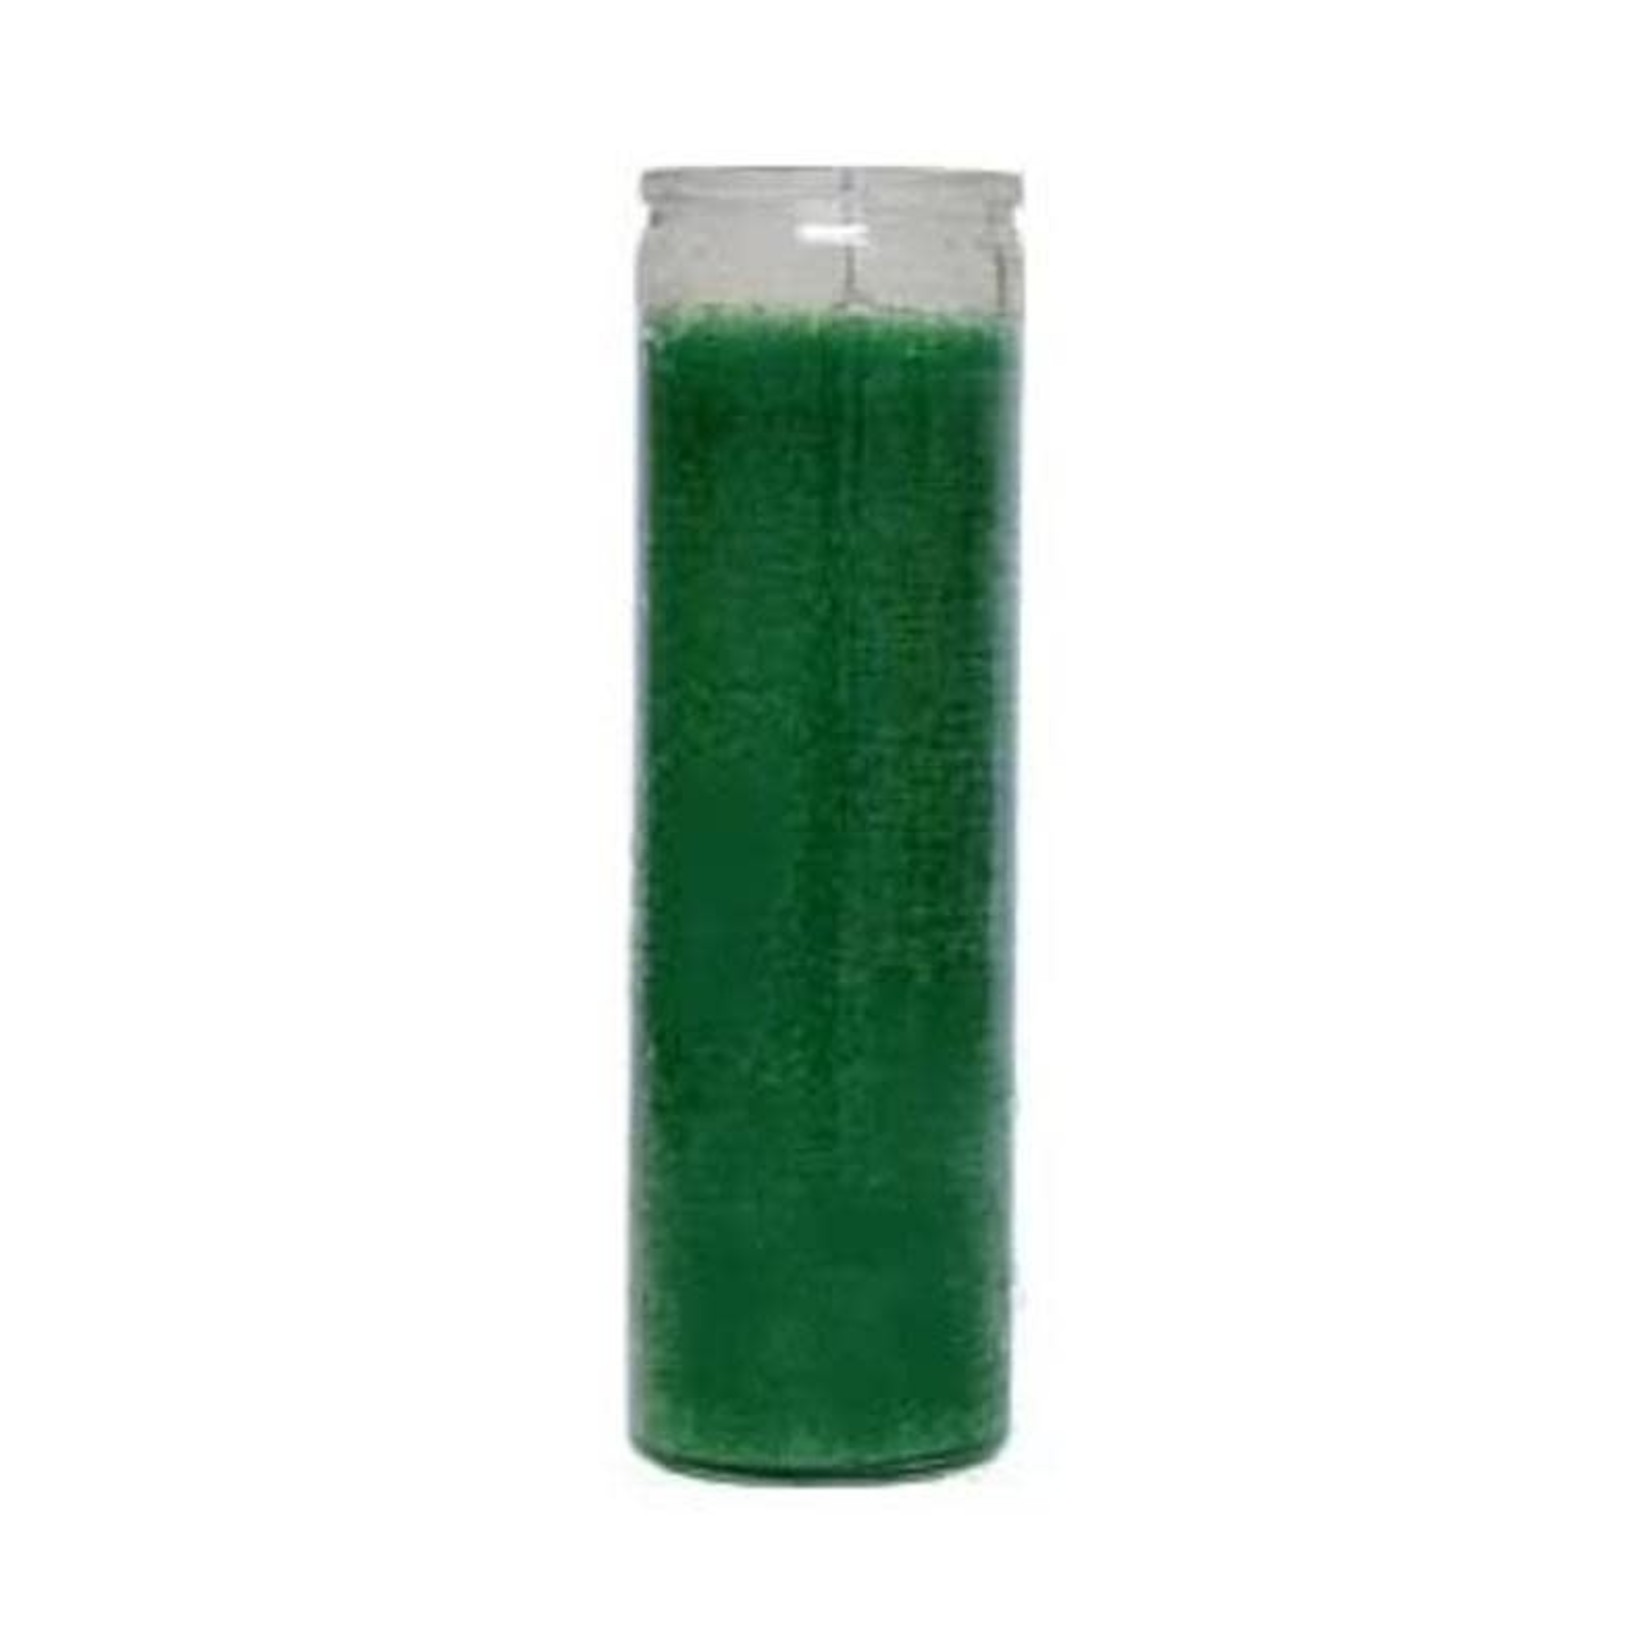 Plain Green 7 Day Candle